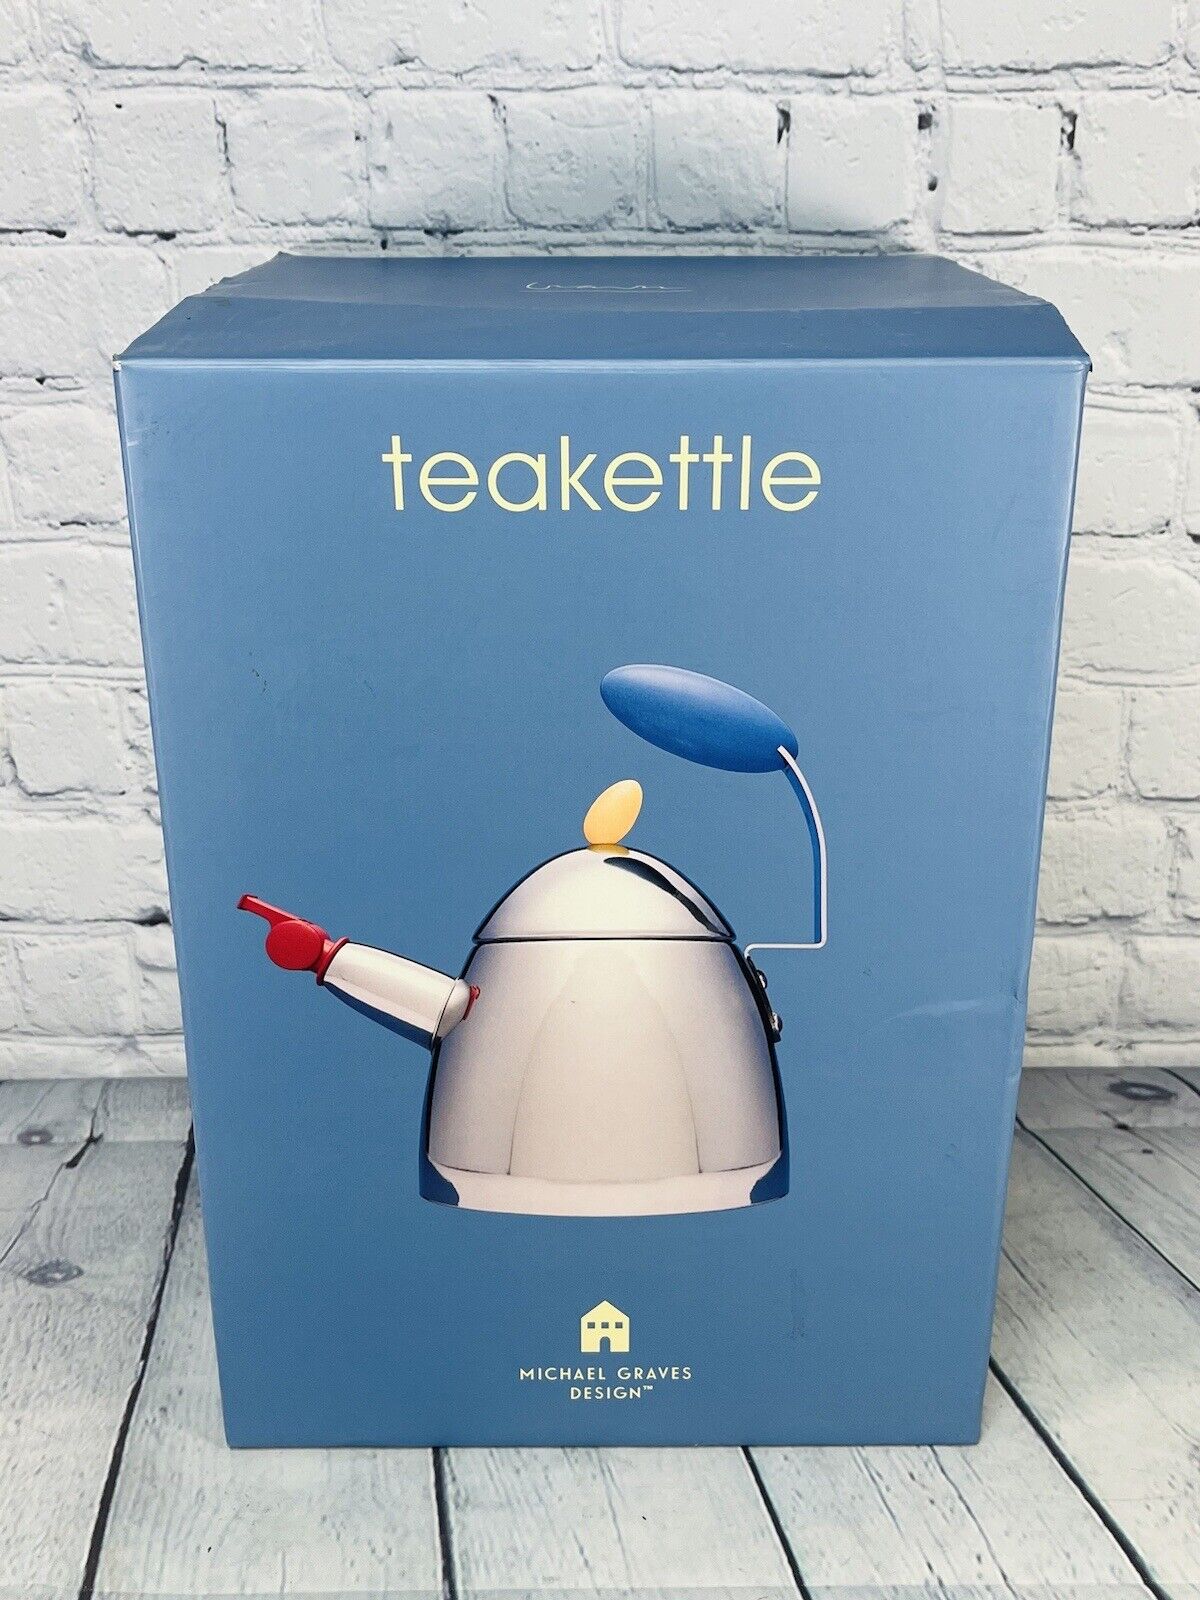 Michael Graves Whistle Tea kettle Pot Clean In Working Order Stainless IN BOX